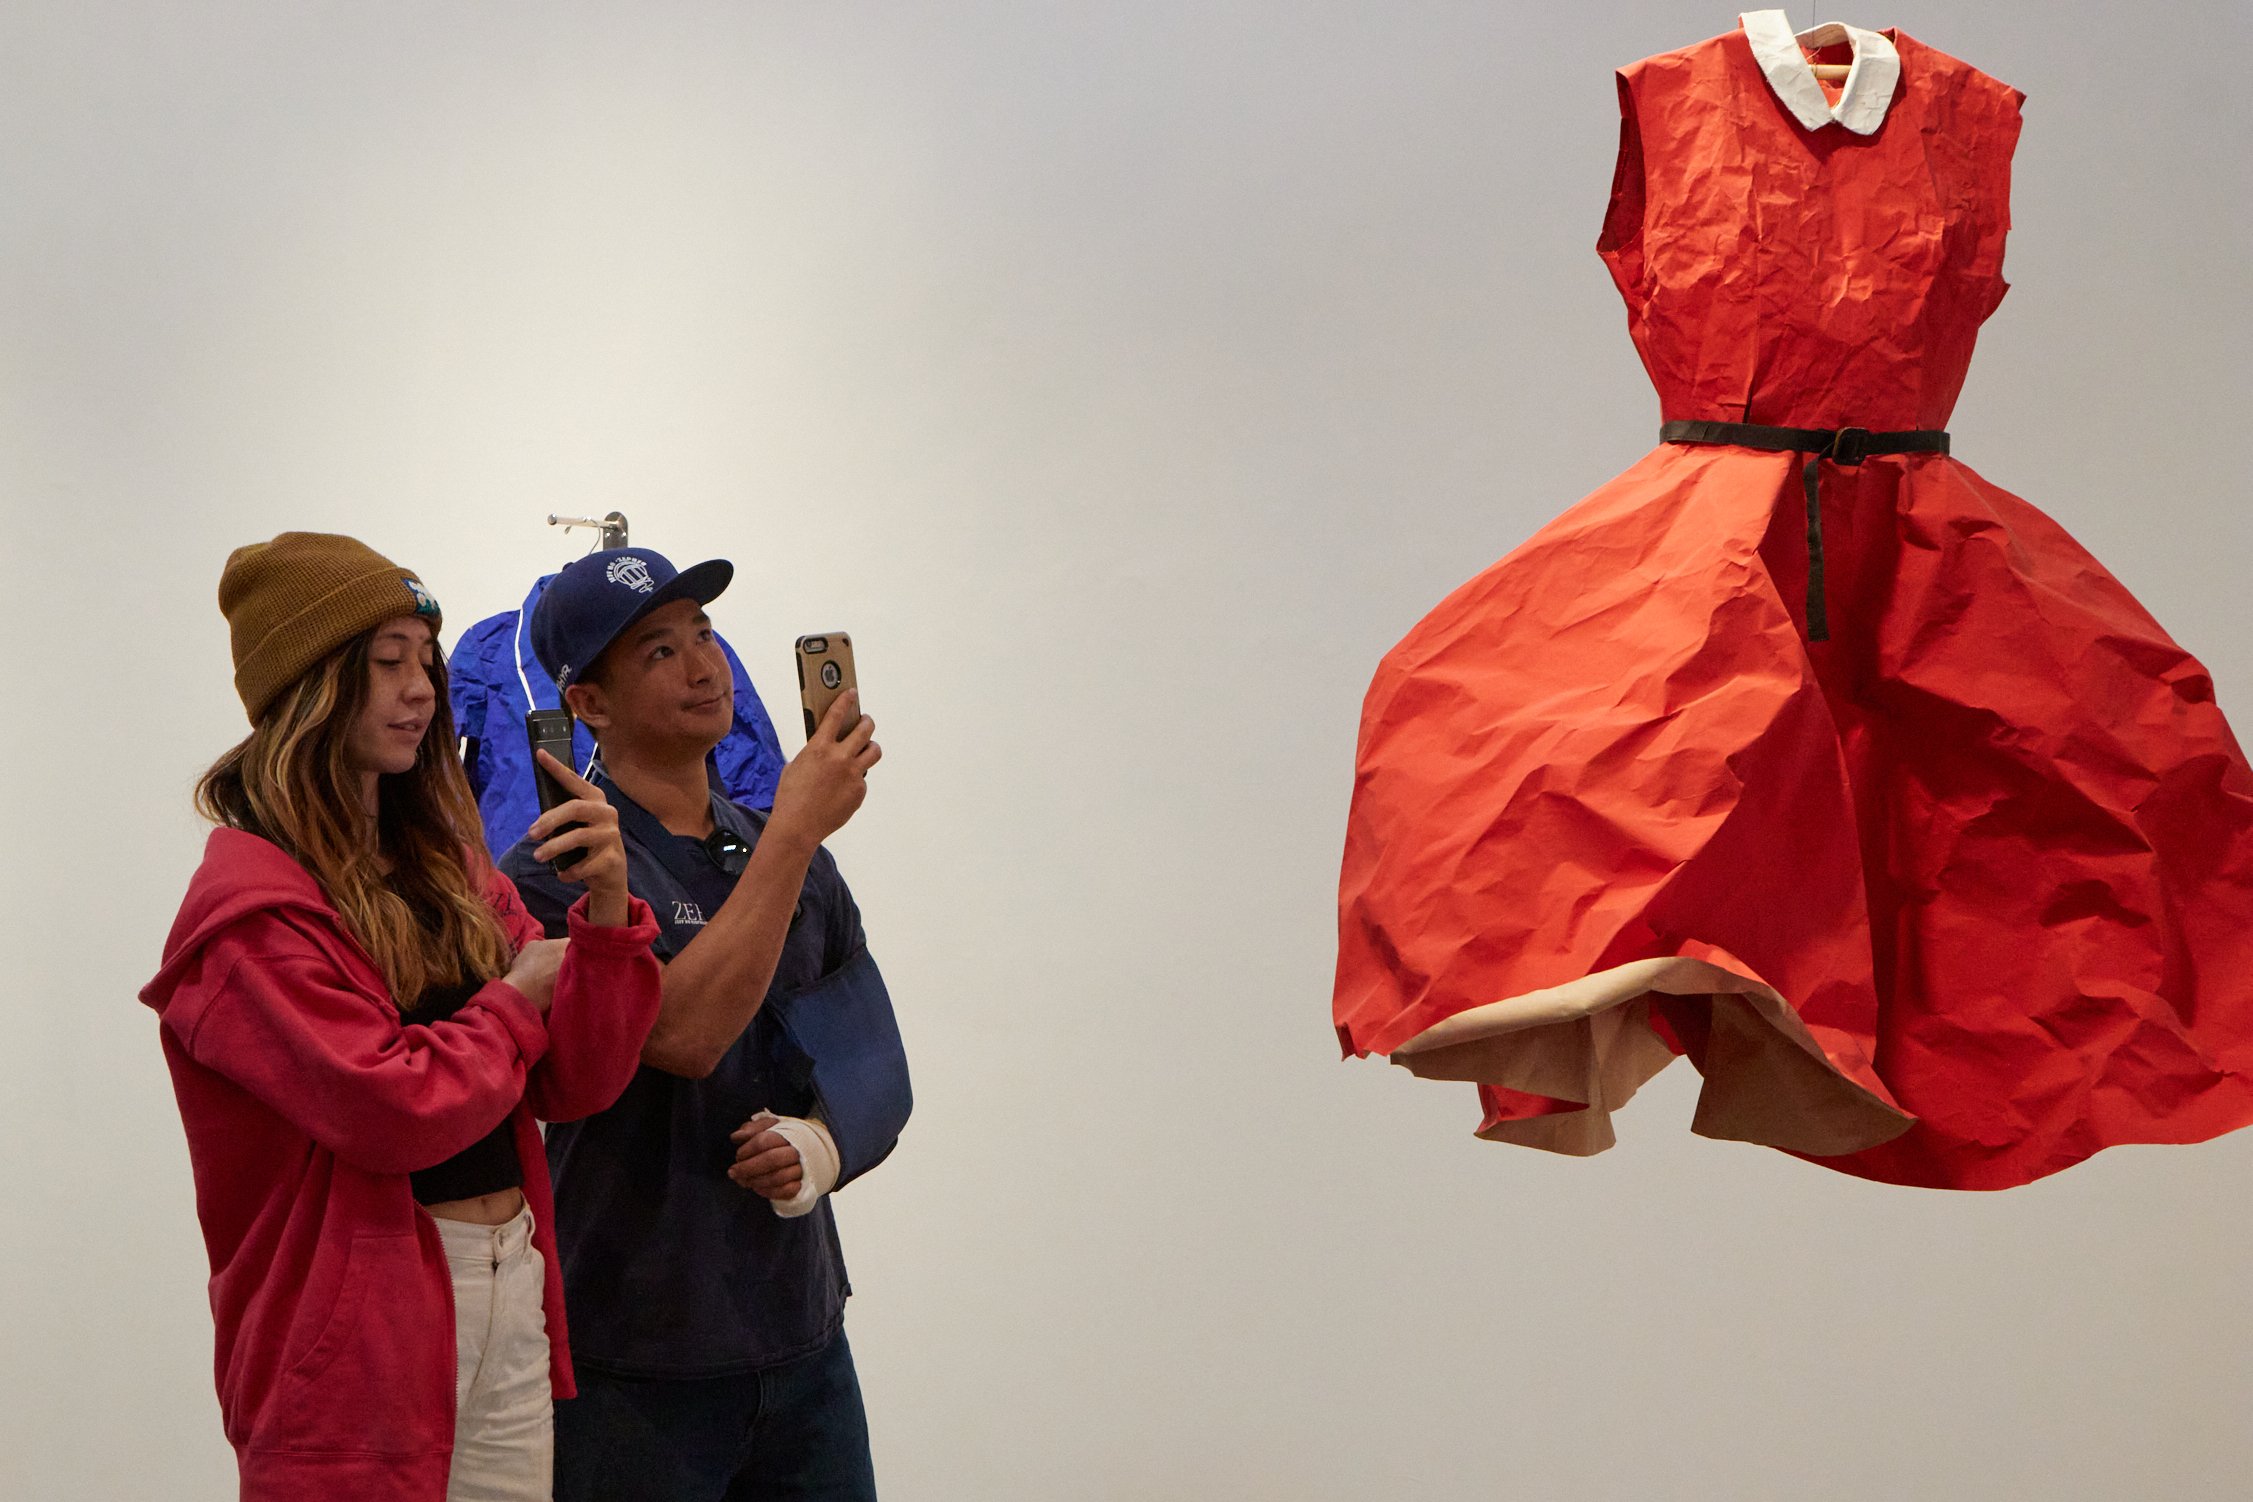  Asia Cruz (left) and Jonathan Vu (right) takes a picture of a red dress from Phranc's childhood in her art exhibition The Butch Closet in Craig Krull Gallery at Bergamot Station Arts Center, Santa Monica, Calif., on Nov. 4, 2023. The clothes that ha